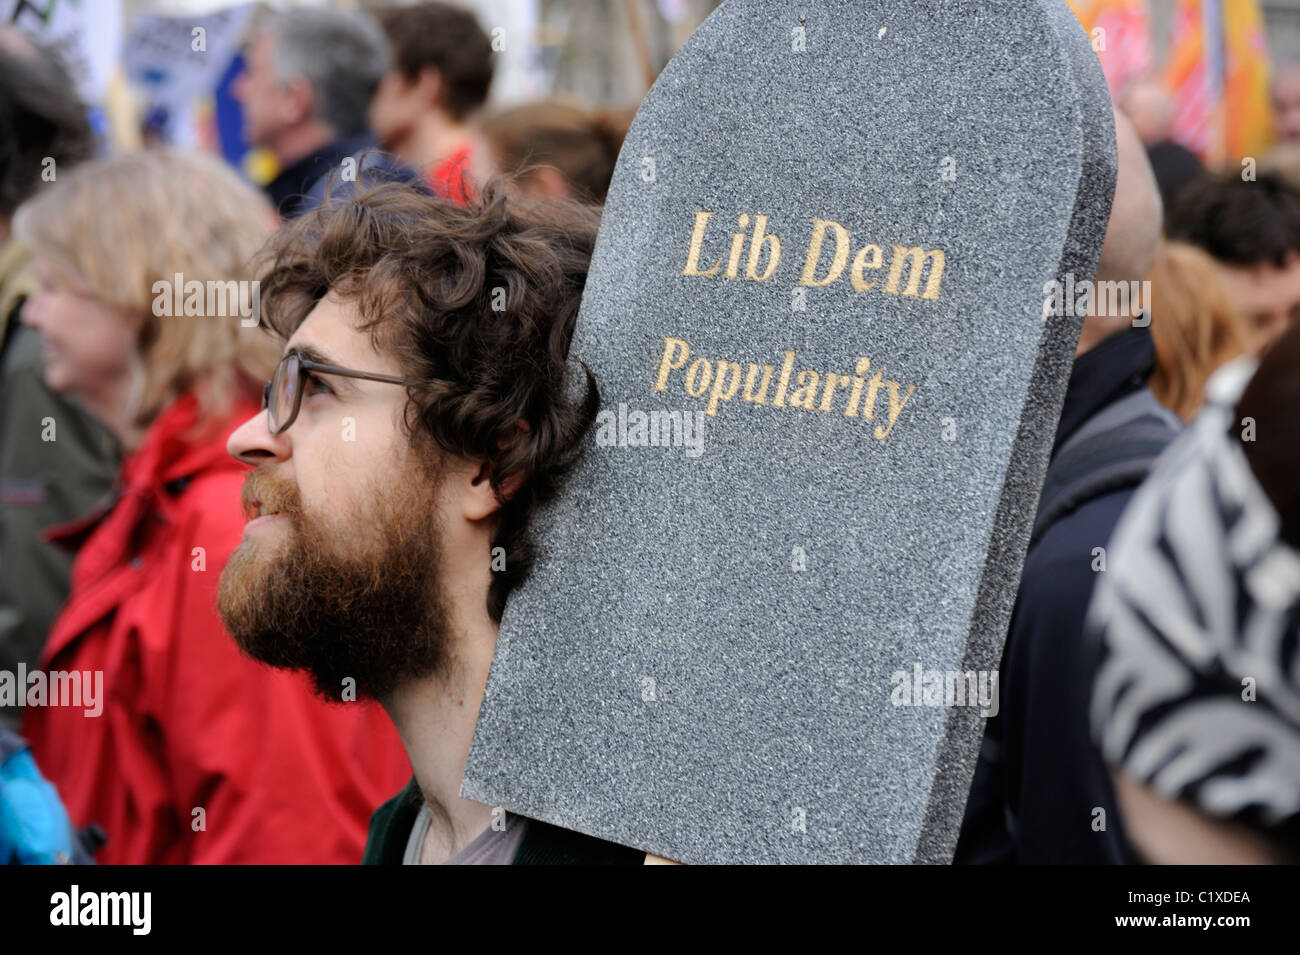 Protester comments on Lib-Dem popularity, TUC Anti-Spending Cuts March, London 26th March 2011 Stock Photo